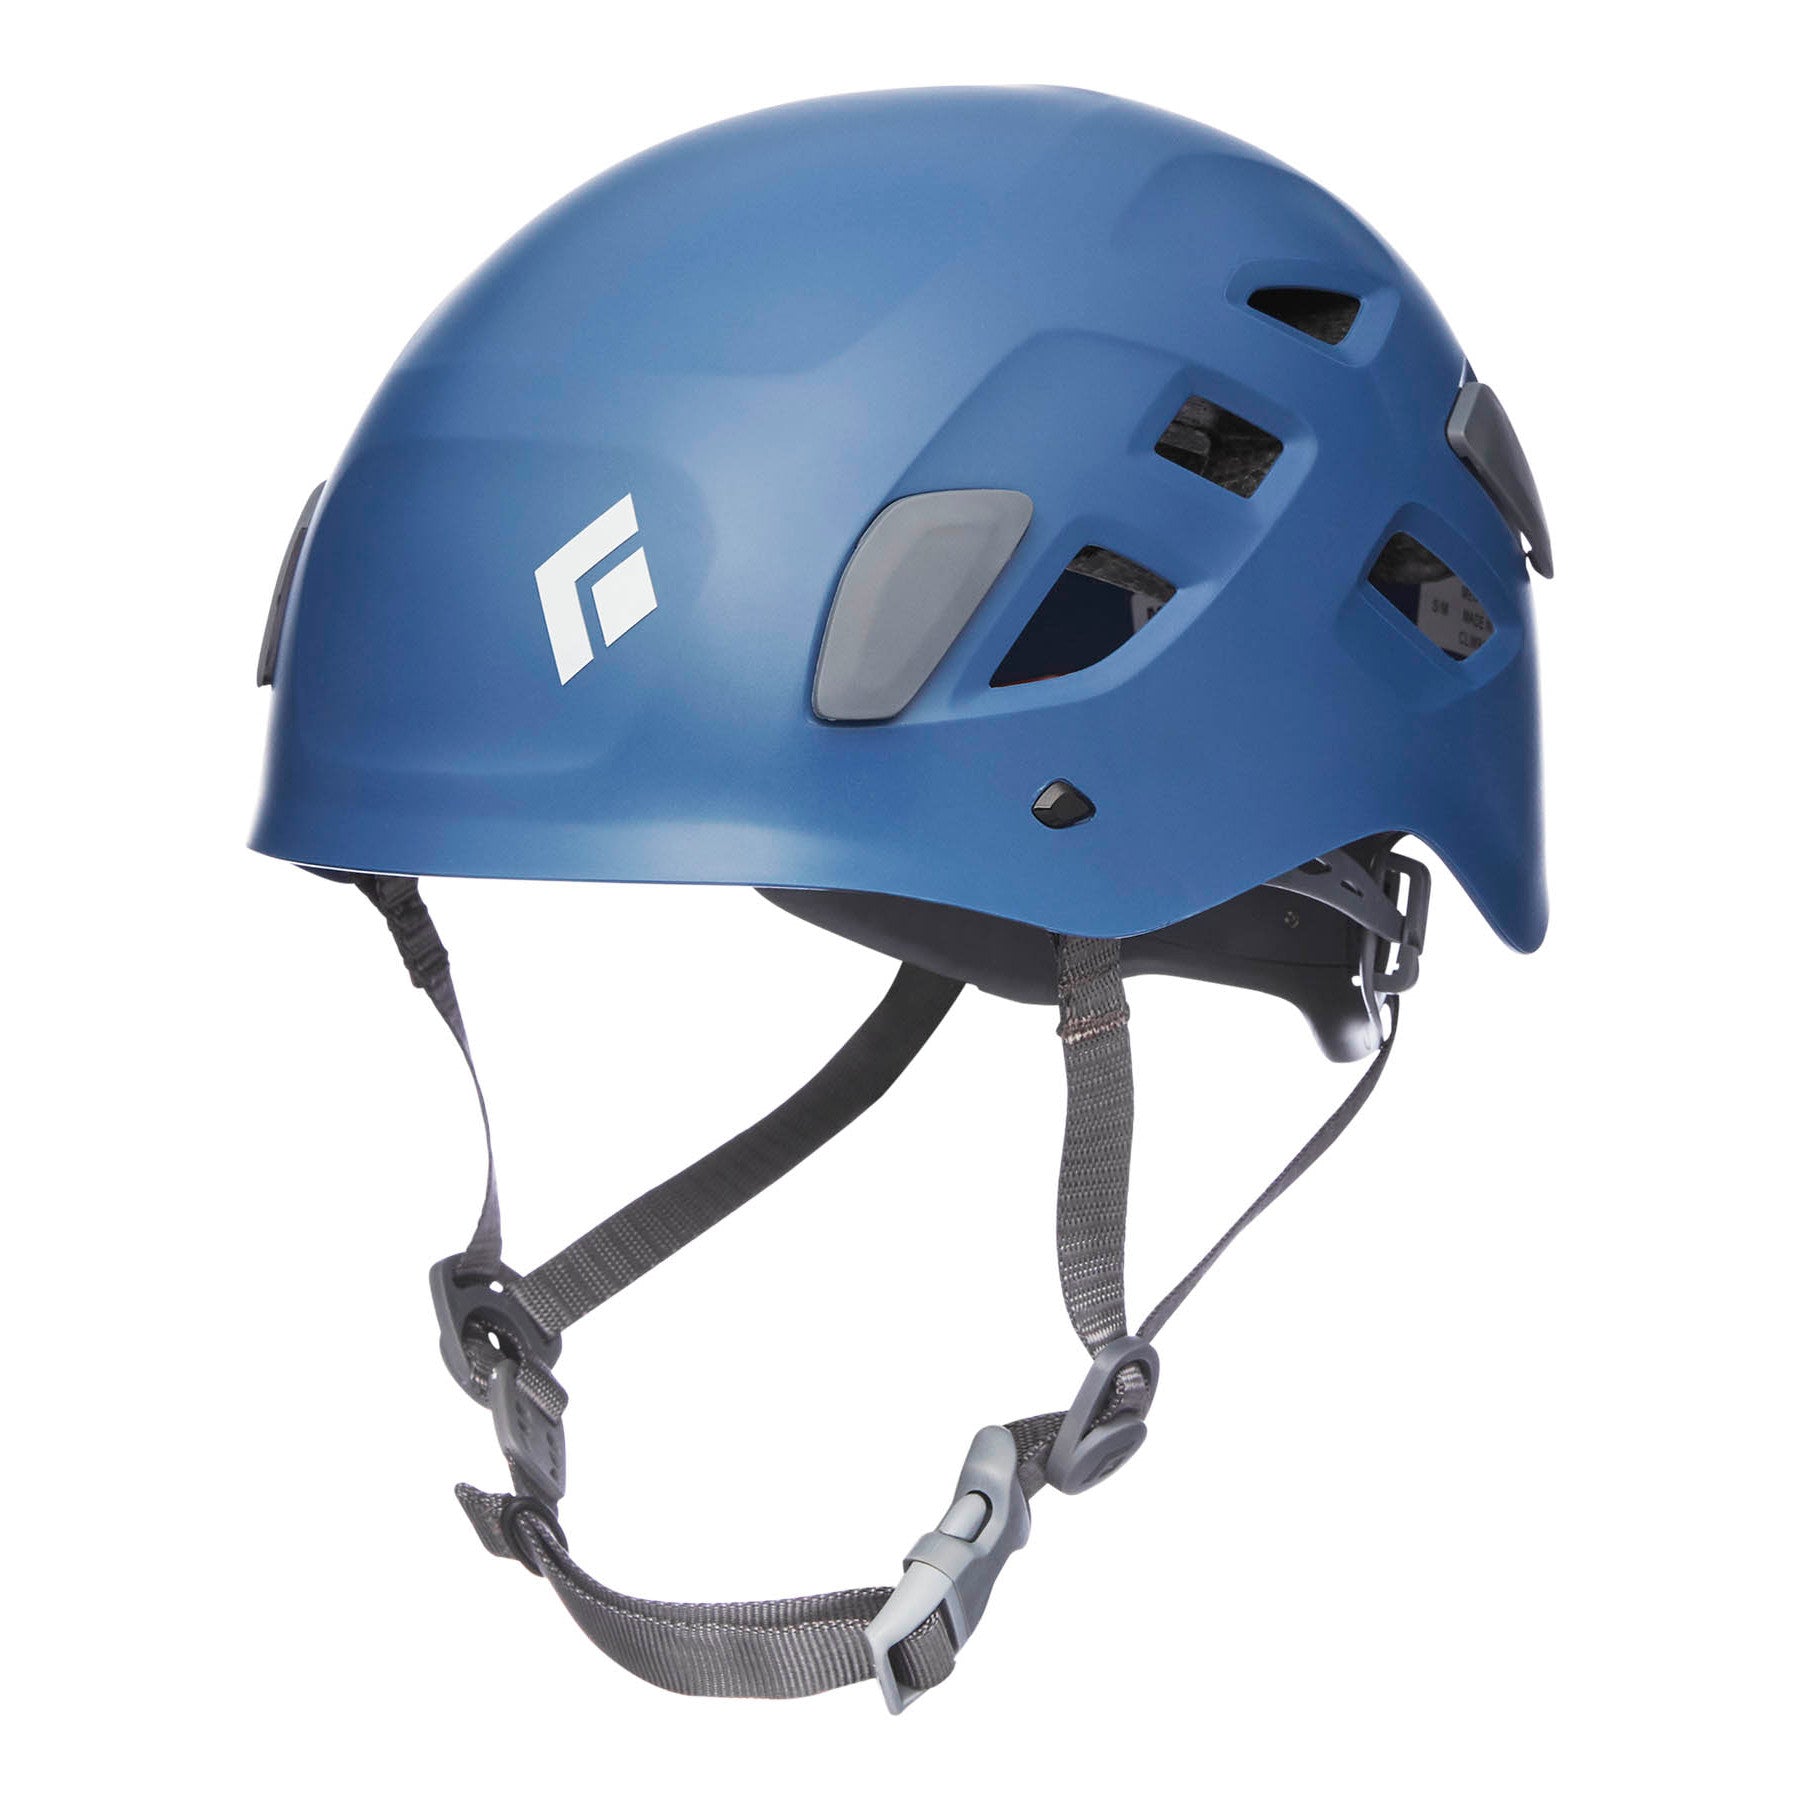 Black Diamond Half Dome climbing helmet, front/side view in orange colour with grey chin strap